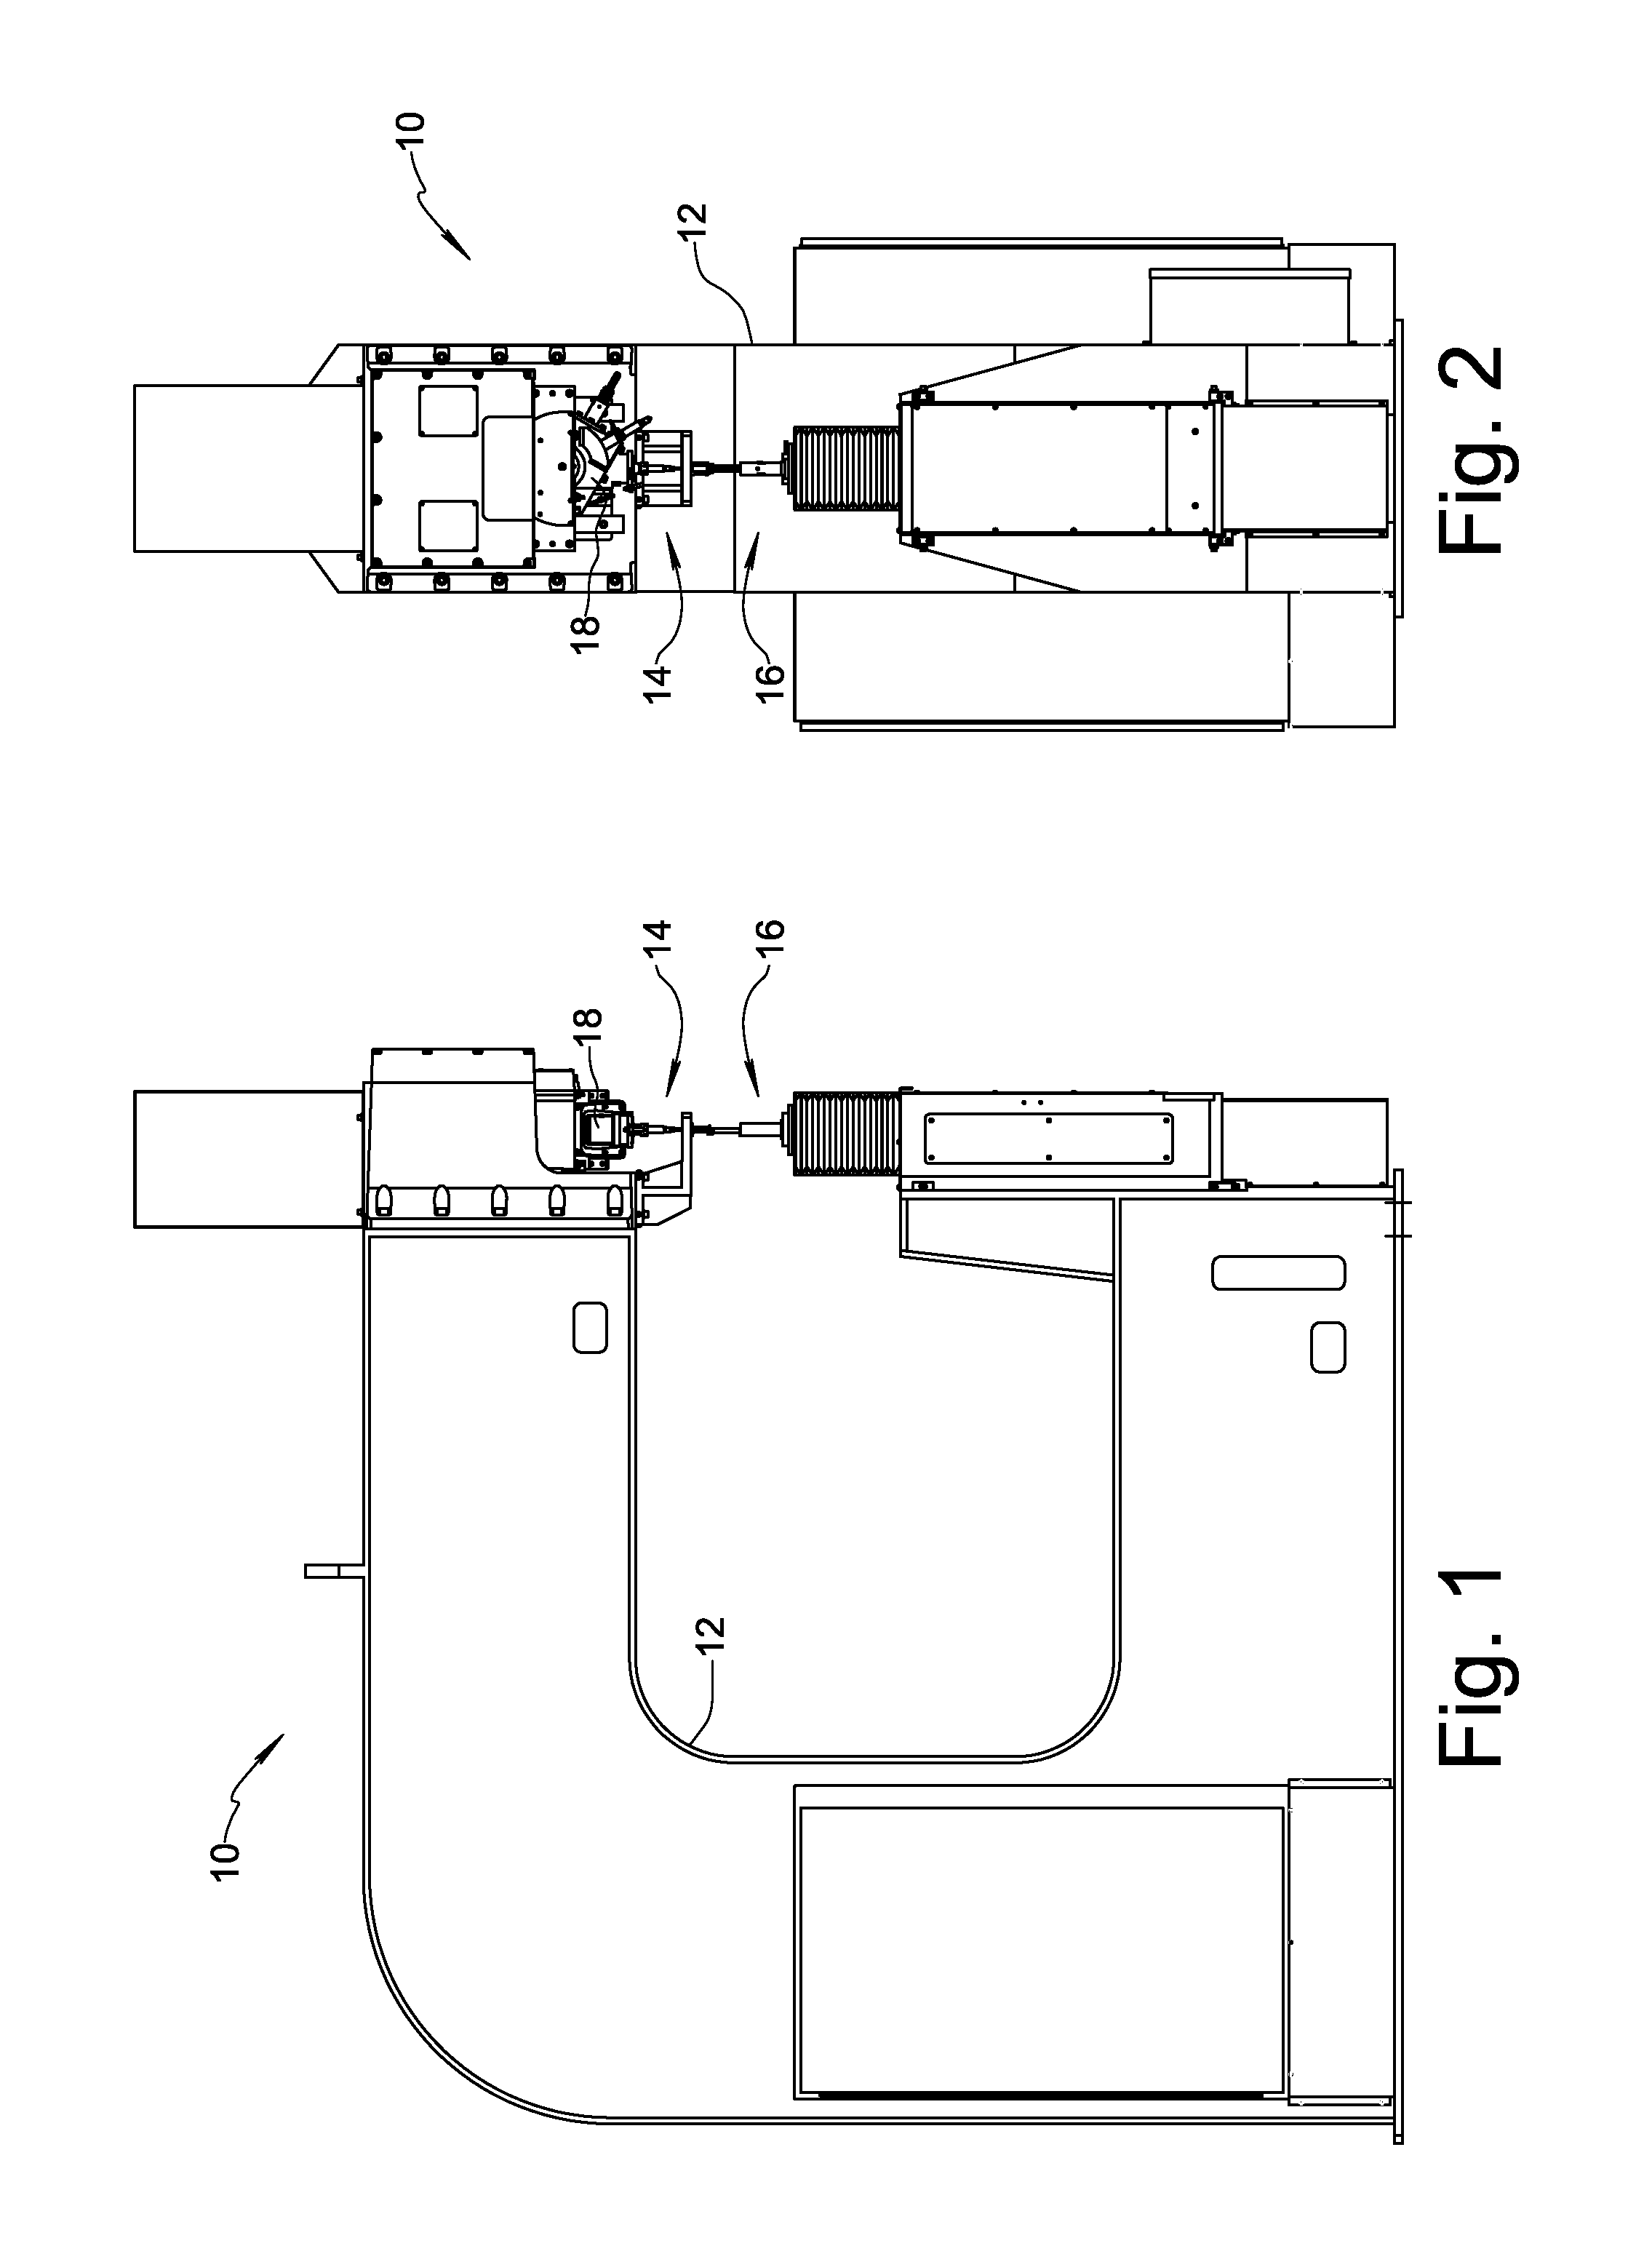 Apparatus and method for improving safety and quality of automatic riveting operations